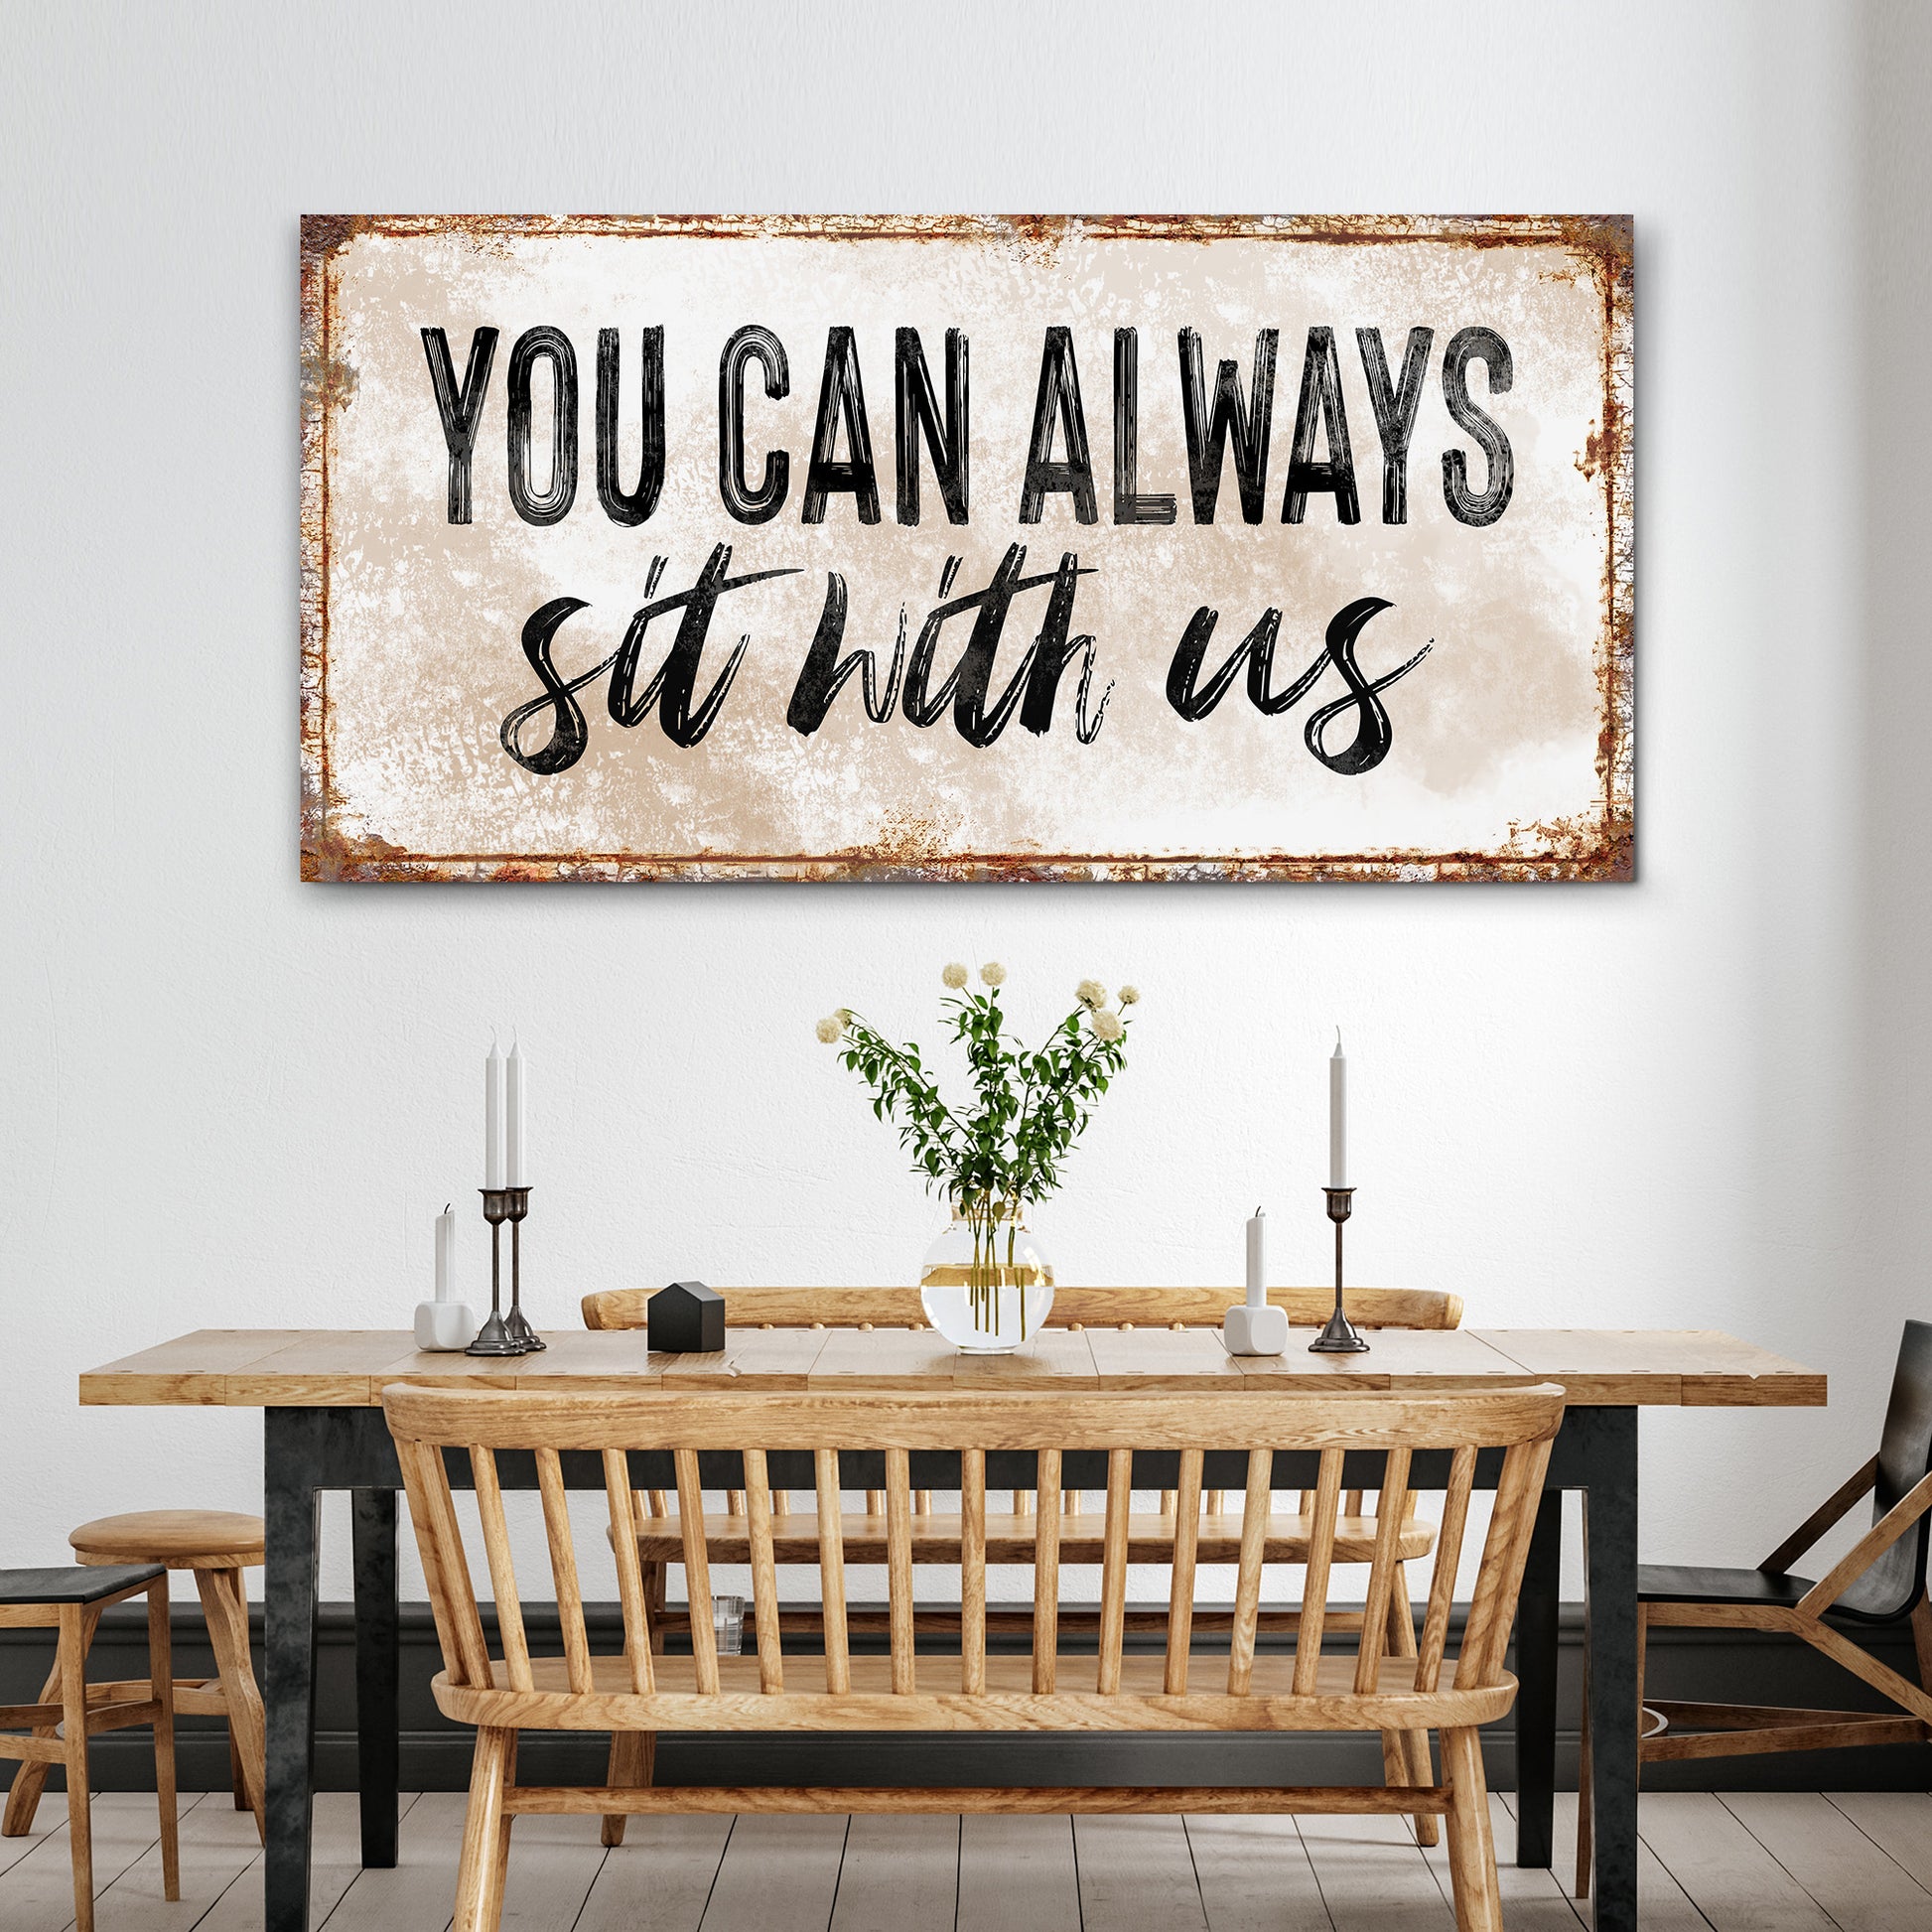 You Can Totally Sit With Us Sign II - Image by Tailored Canvases